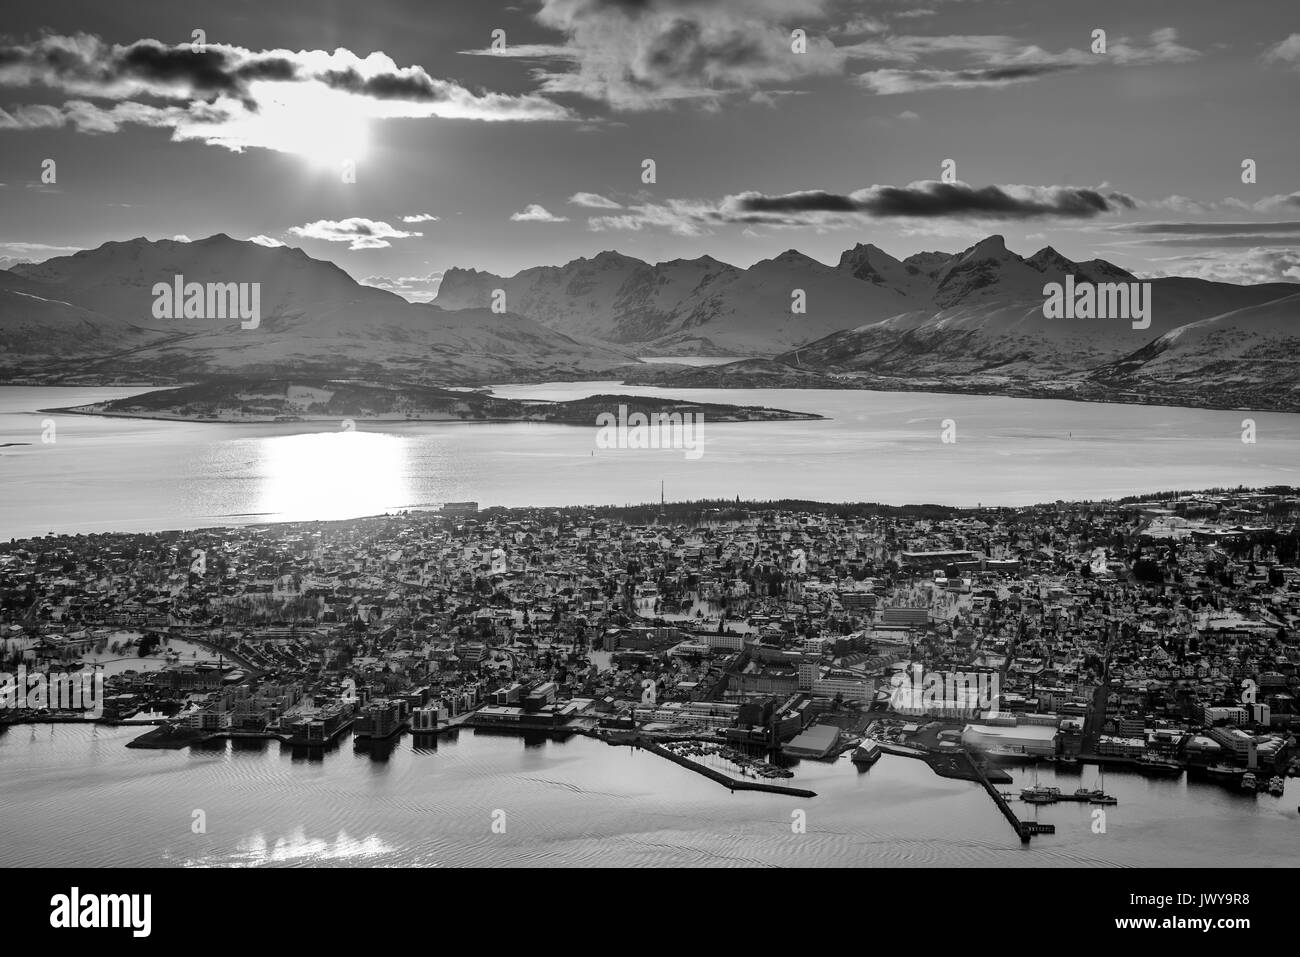 Sunset and the mountains Black and White Stock Photos & Images - Alamy